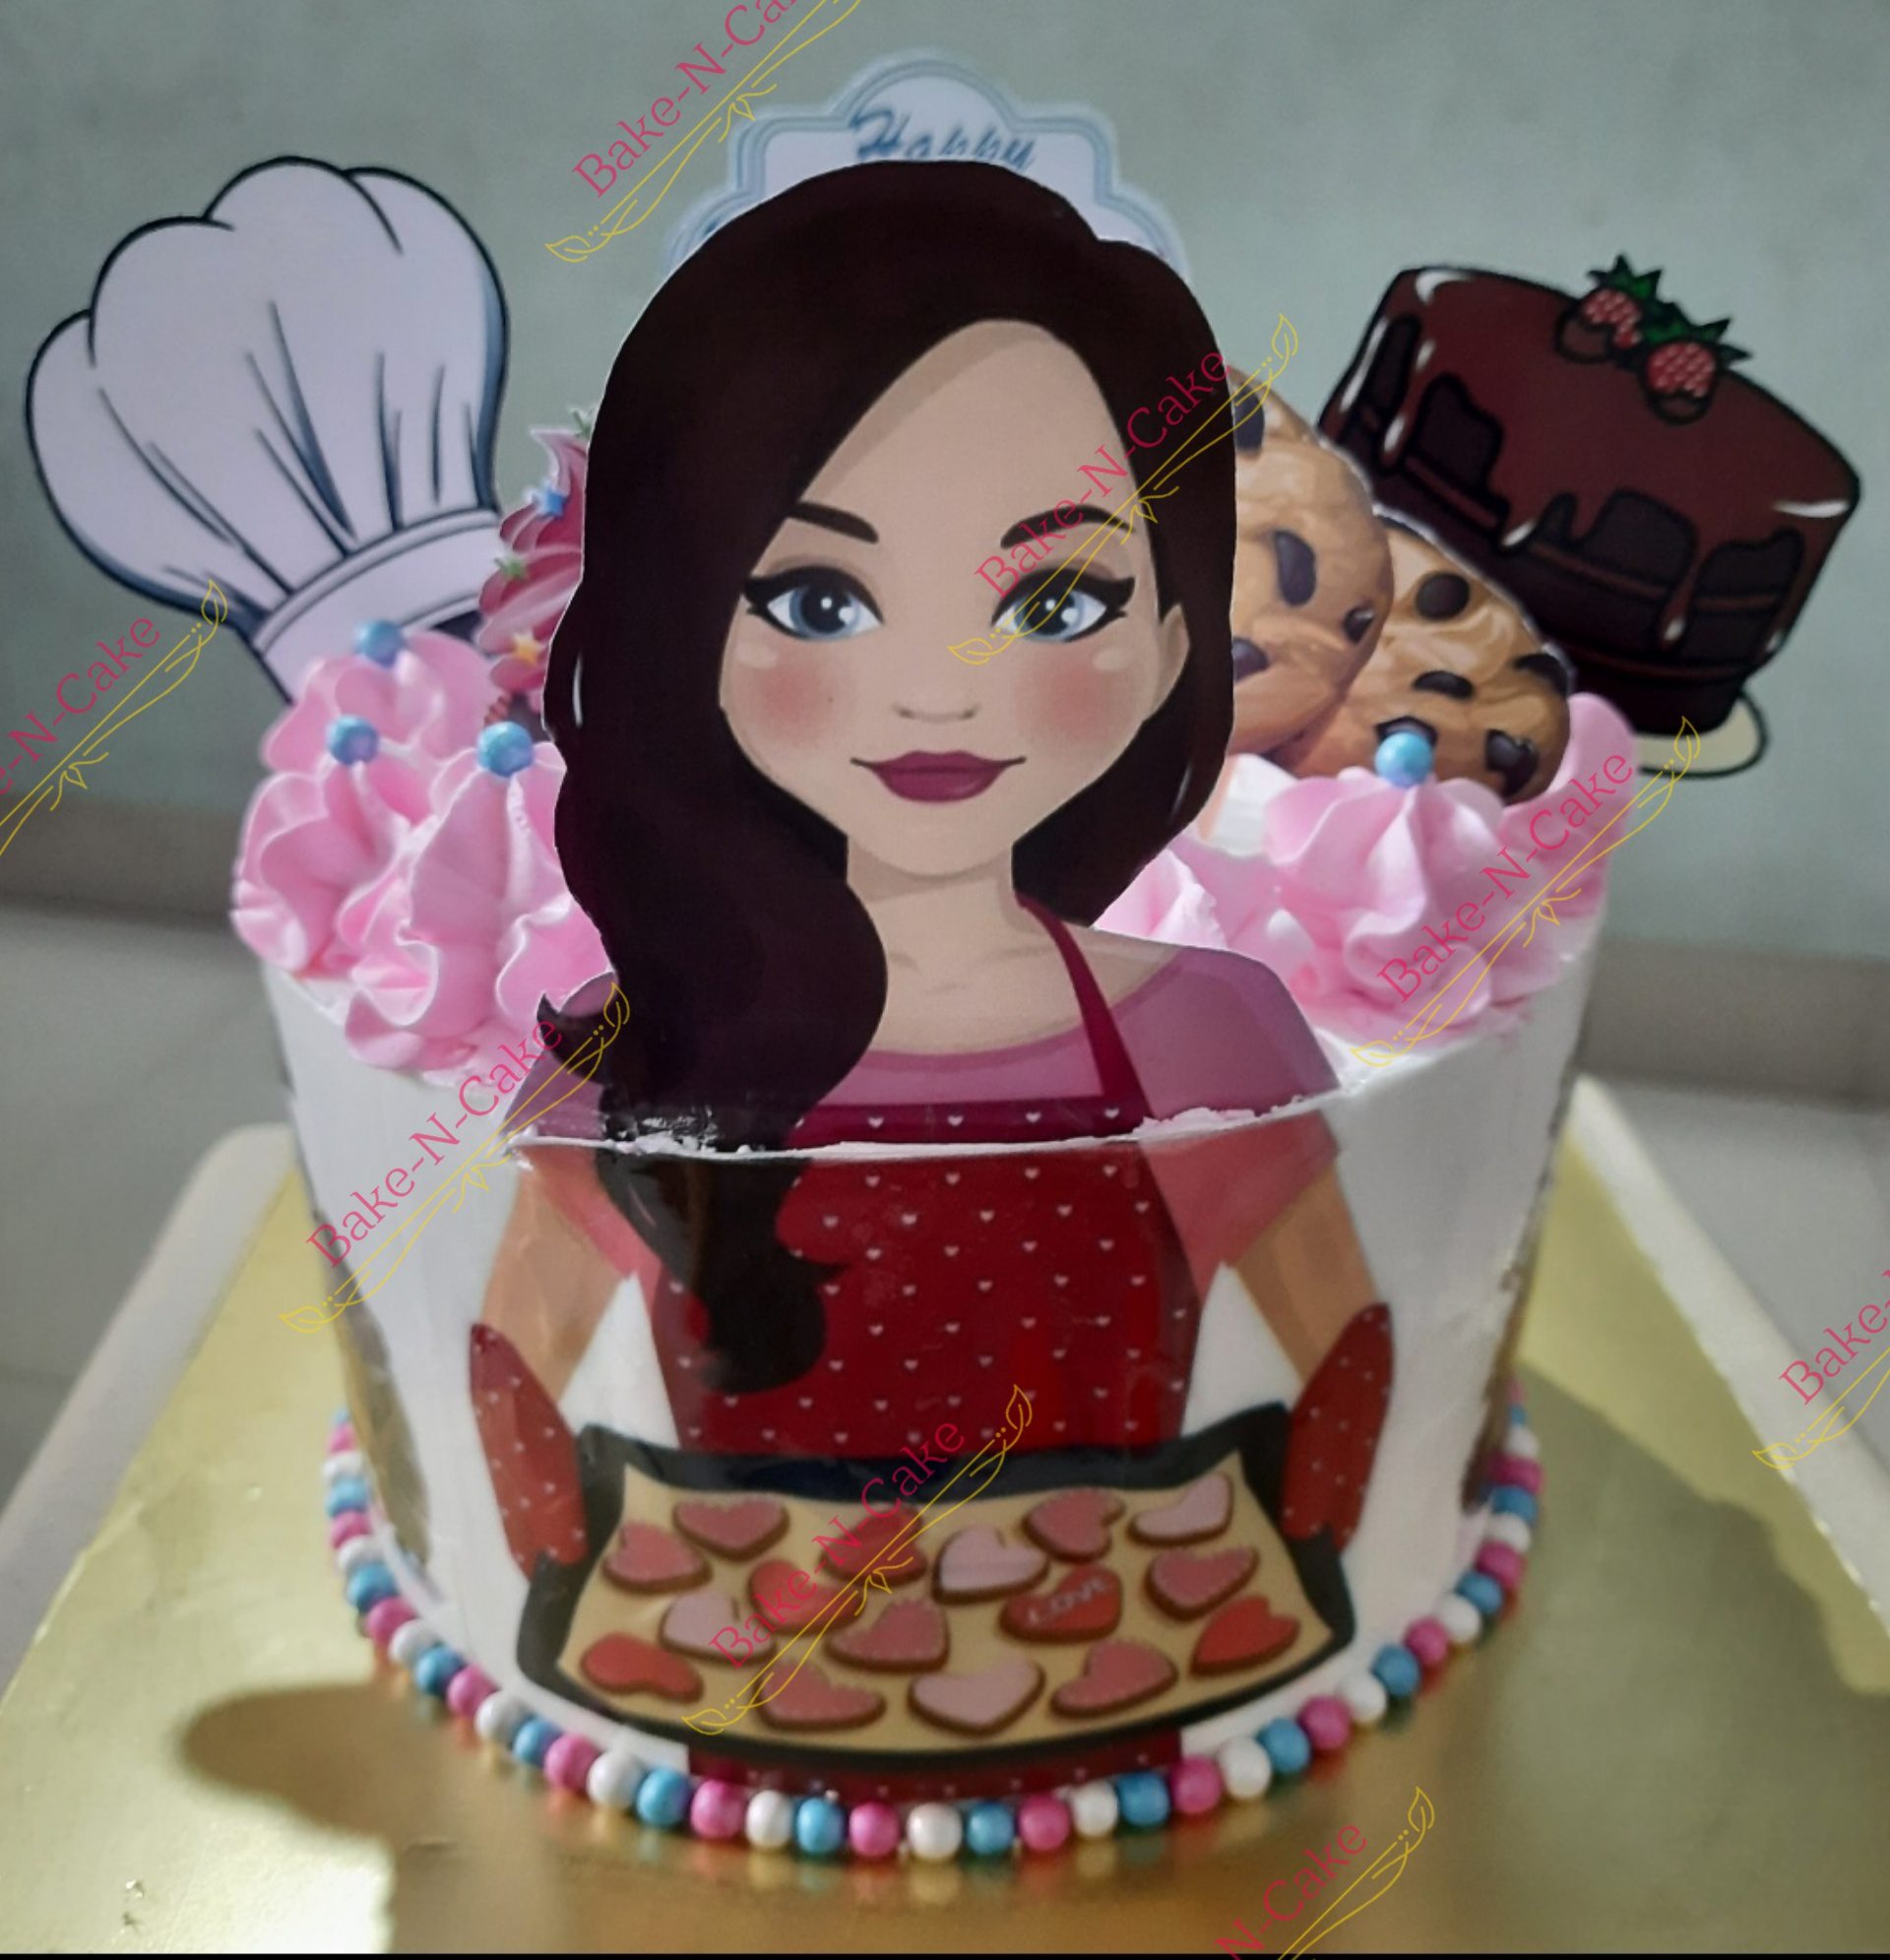 Bakers Theme Cake Designs, Images, Price Near Me